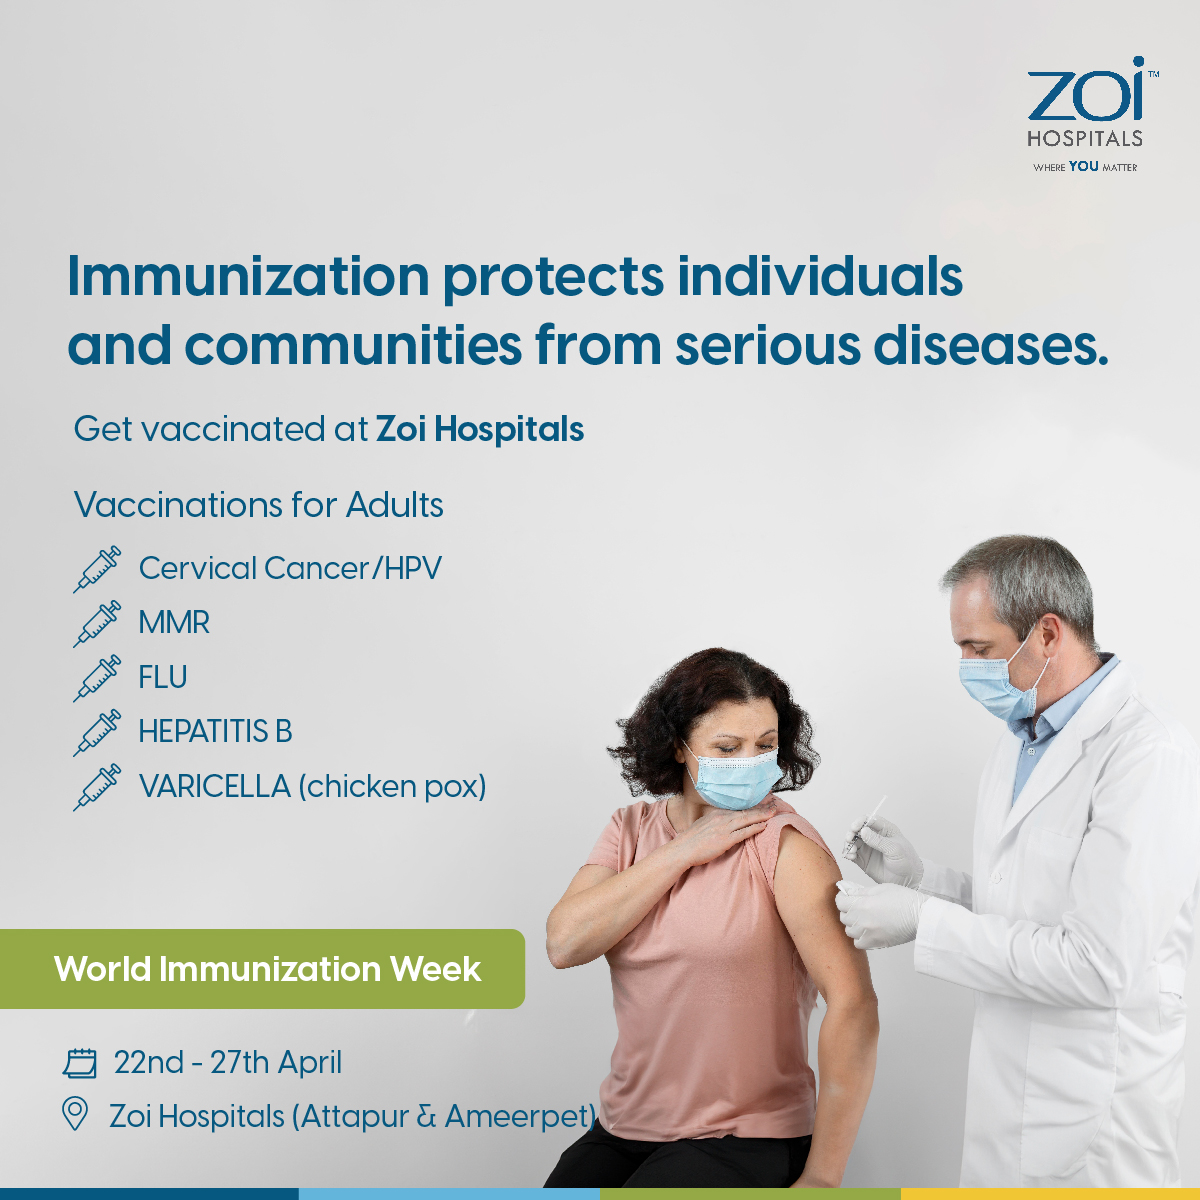 This #WorldImmunizationWeek @ZoiHospitals, come visit us to join the fight against preventable diseases. Visit the link below to learn about the recommended vaccinations for your age. #ZoiAttapur #ZoiAmeerpet #Vaccine #GetVaccinated zoihospitals.com/l/world-immuni…